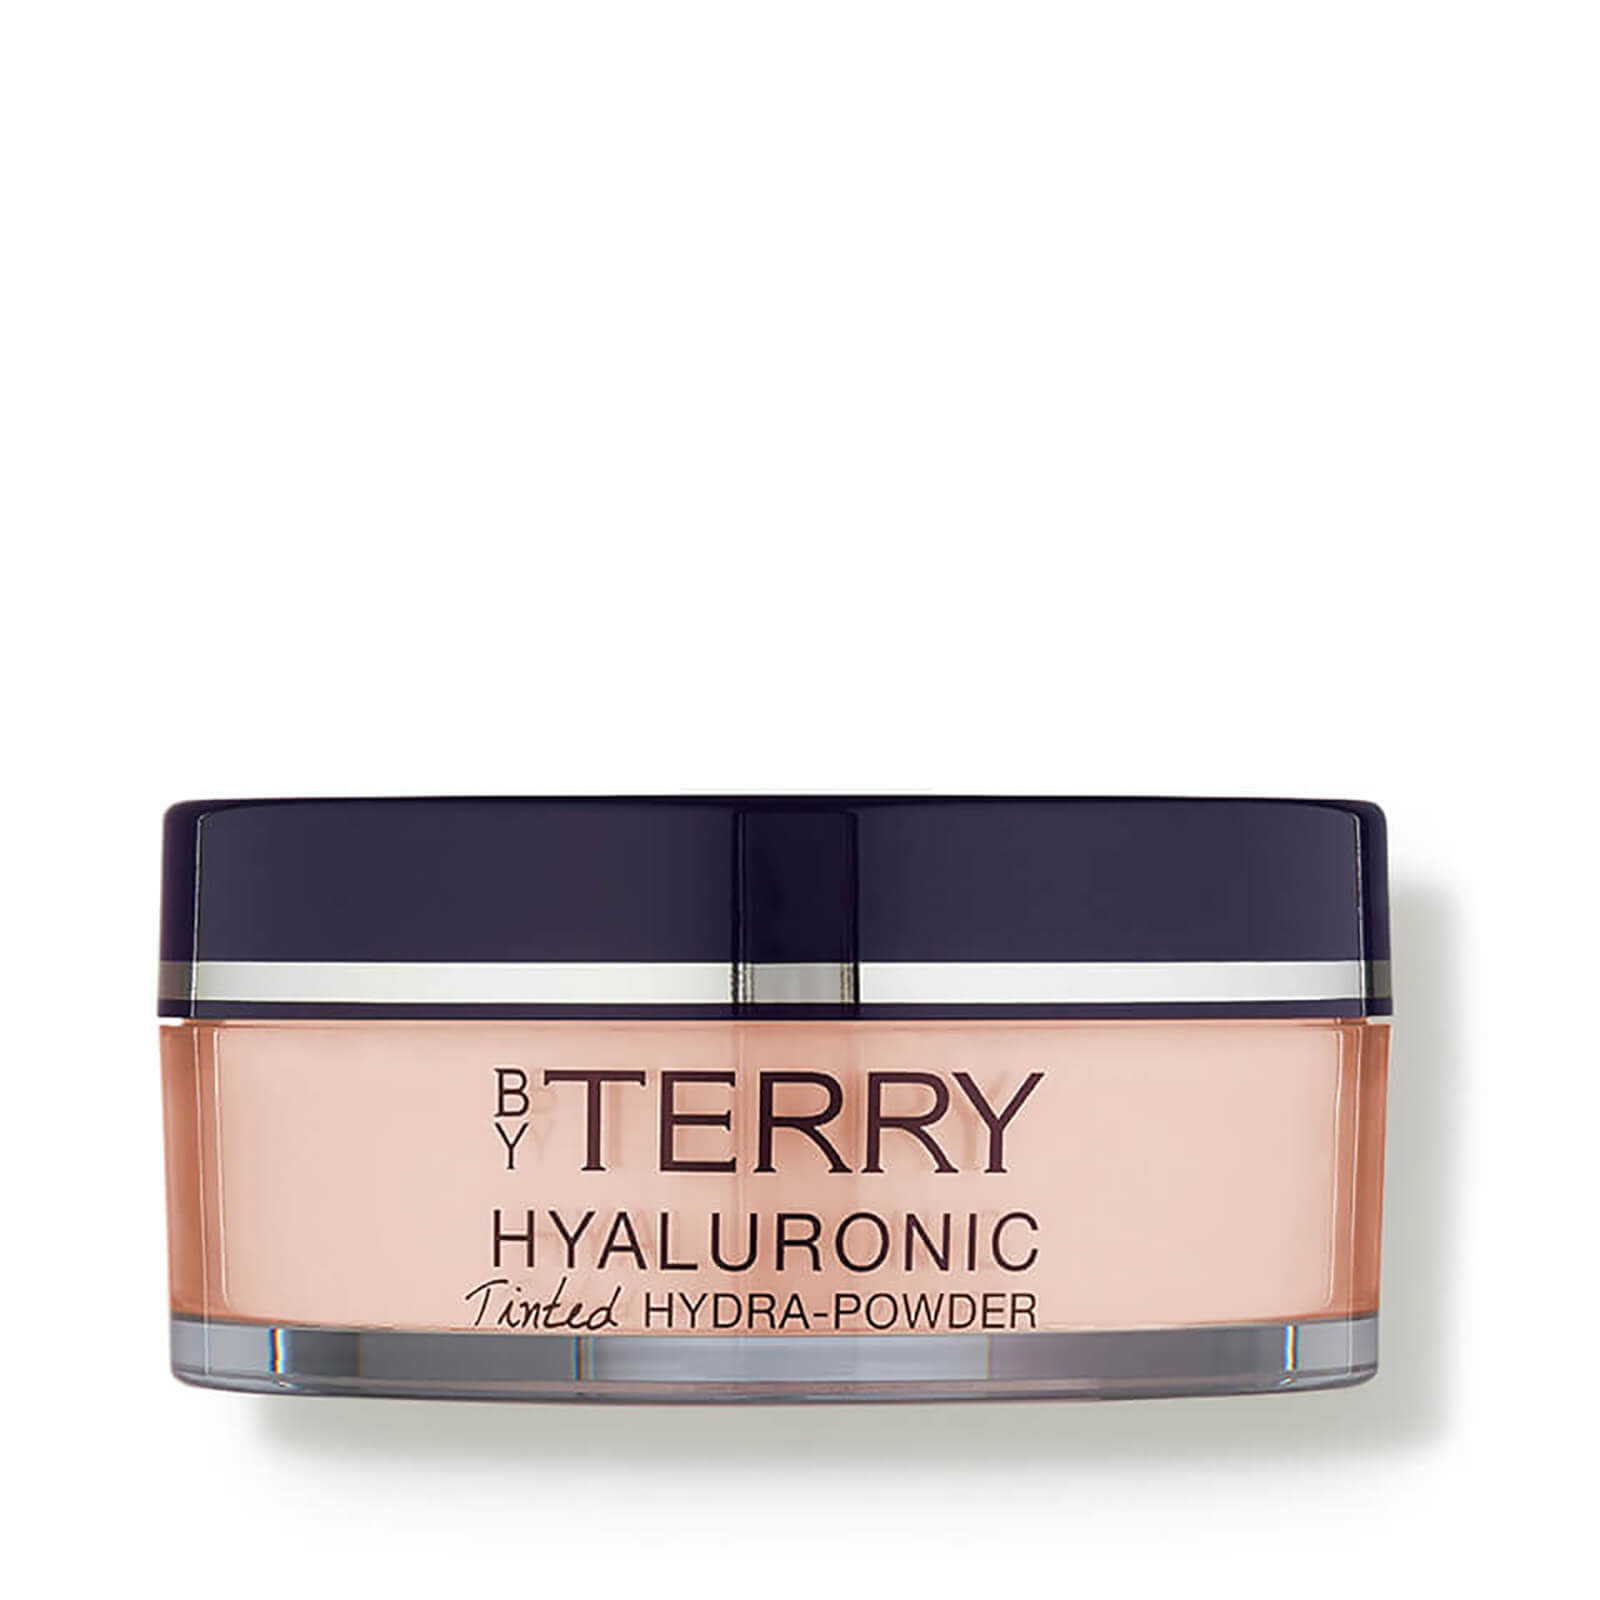 By Terry Hyaluronic Tinted Hydra-Powder 10g (Various Shades) - 5 N200. Natural